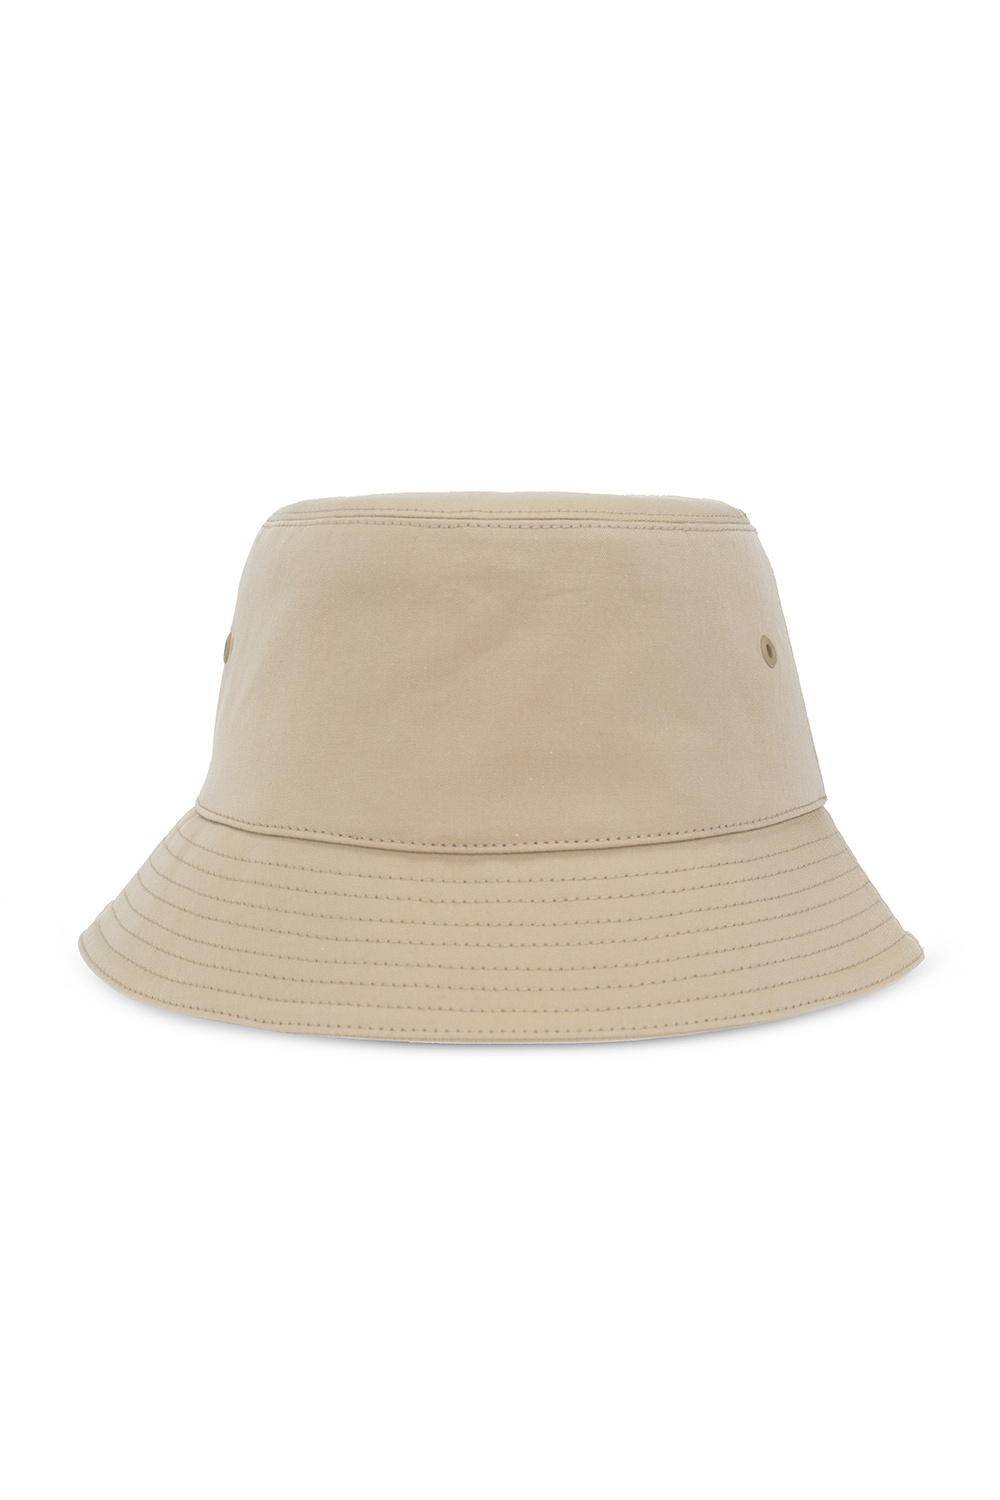 Burberry Craghoppers hat Tristen NosiLife Ultimate